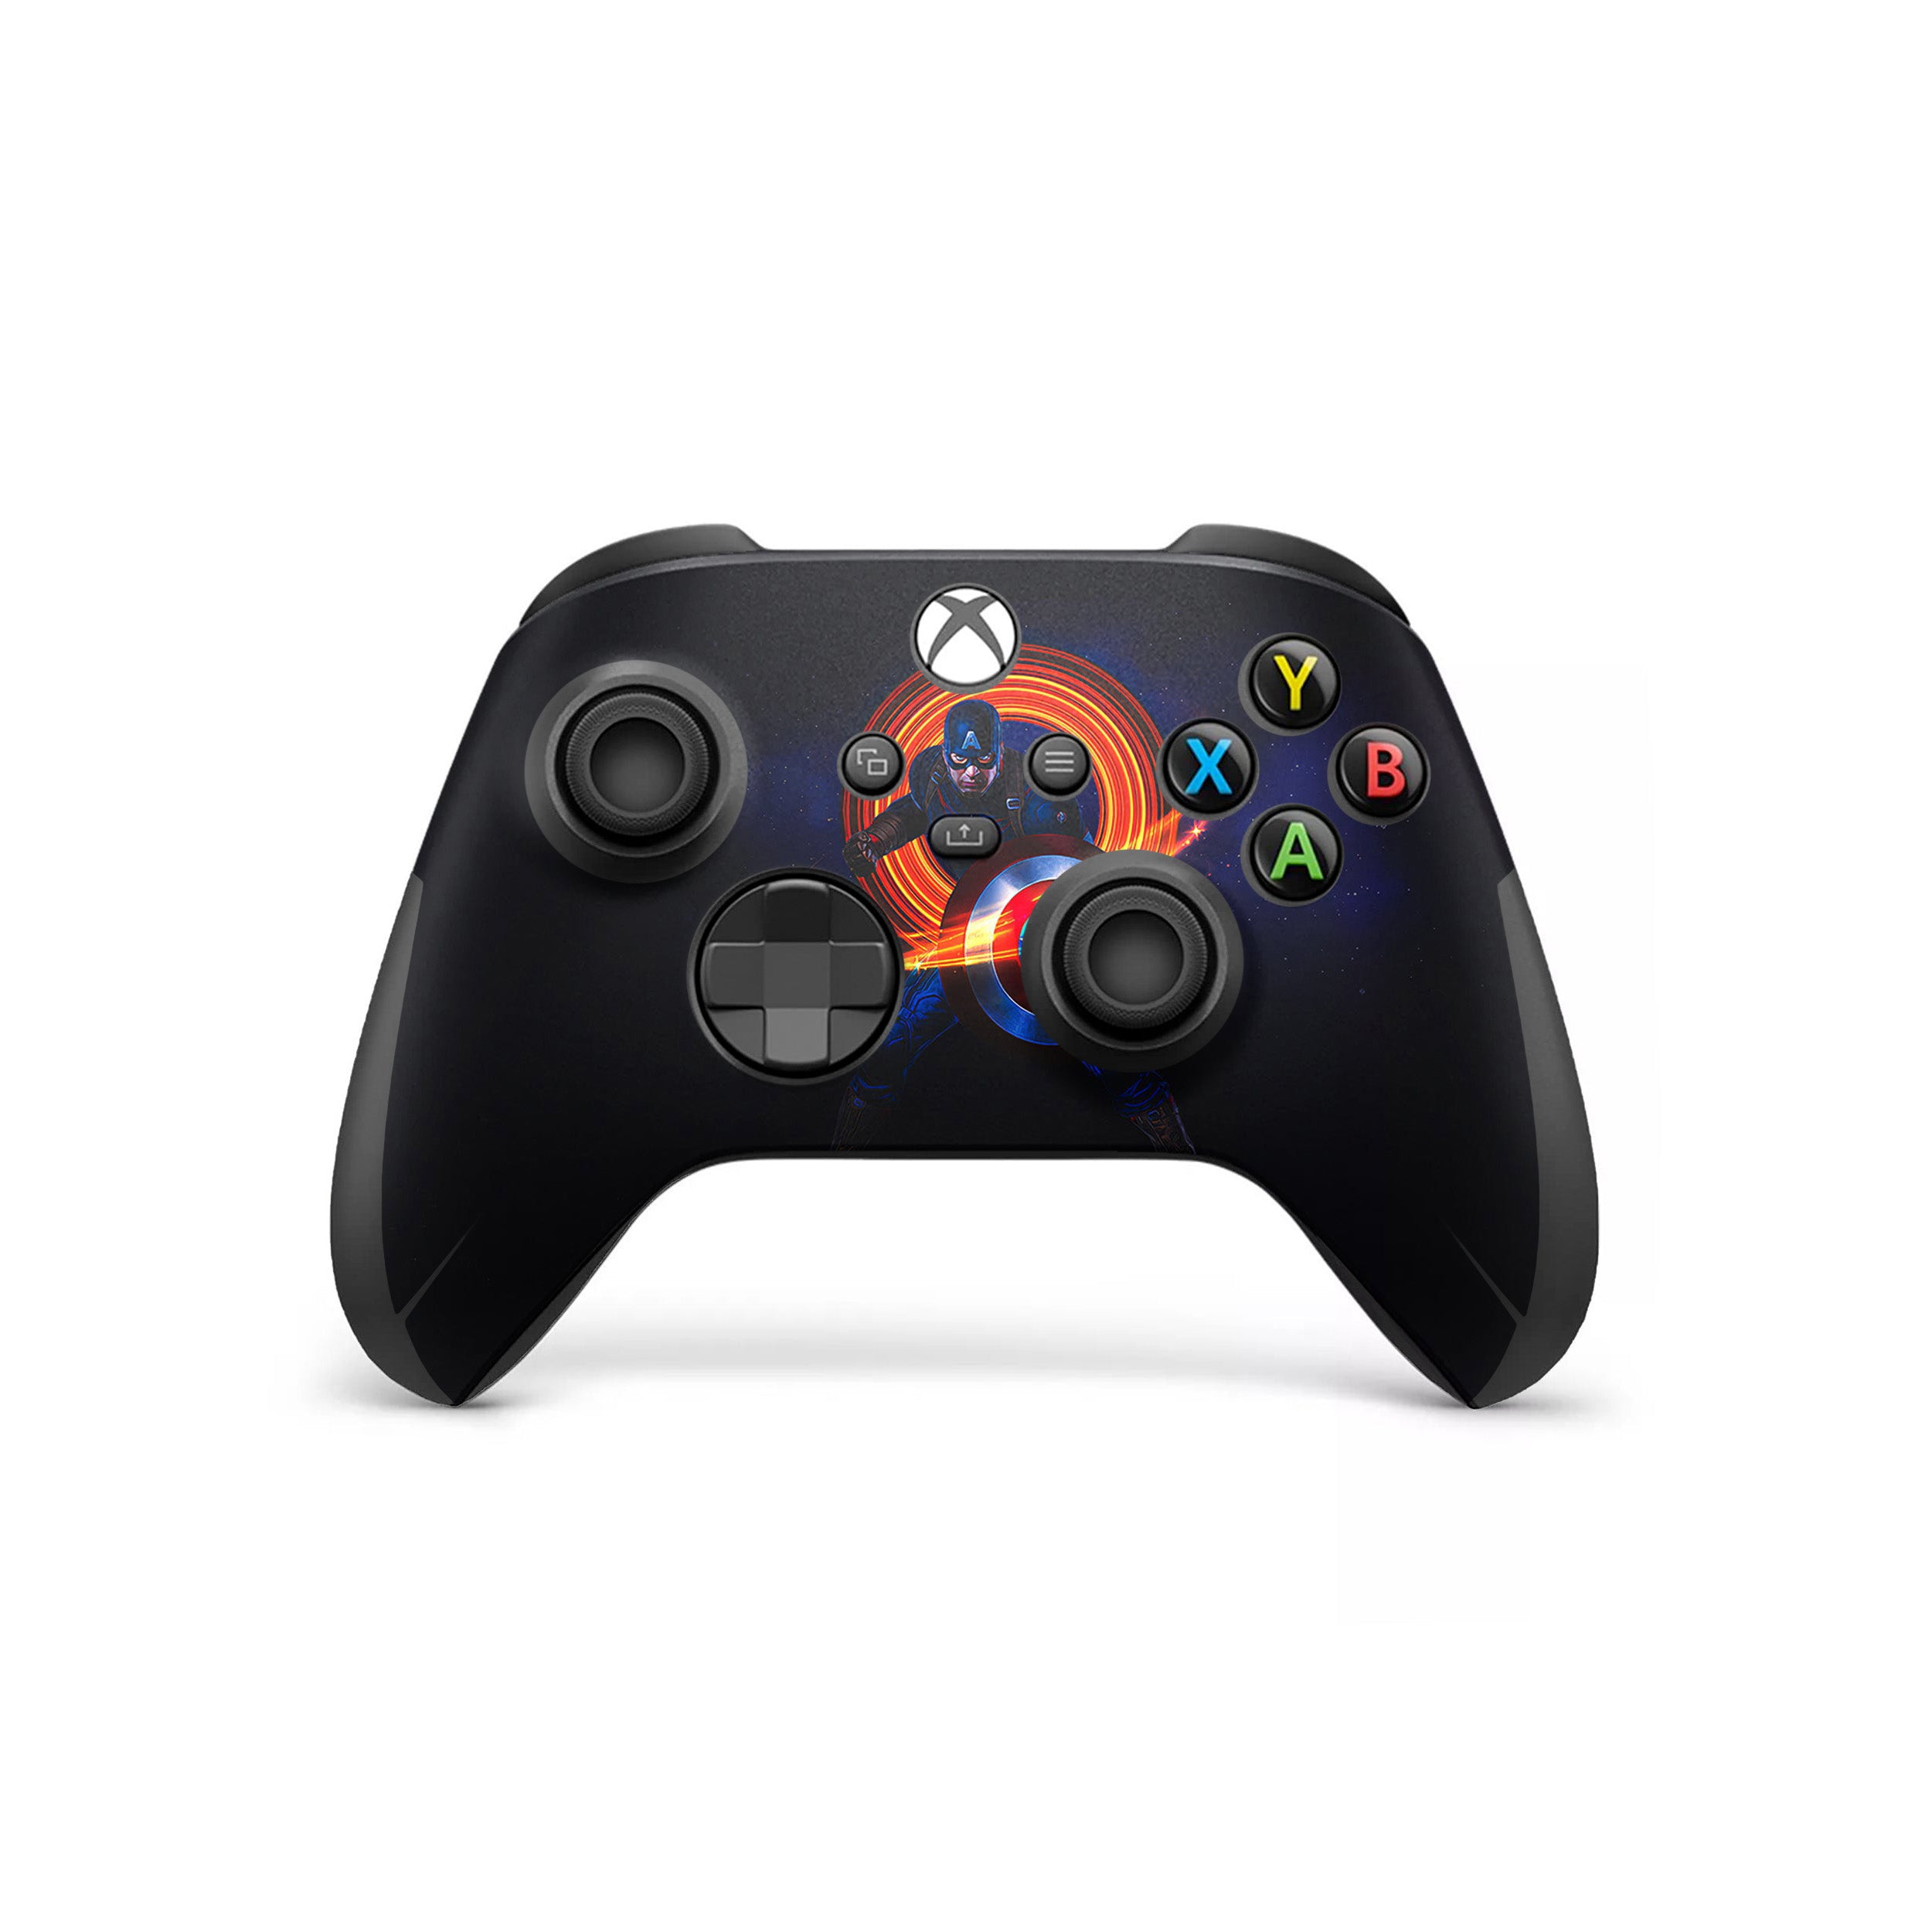 A video game skin featuring a Marvel Comics Captain America design for the Xbox Wireless Controller.